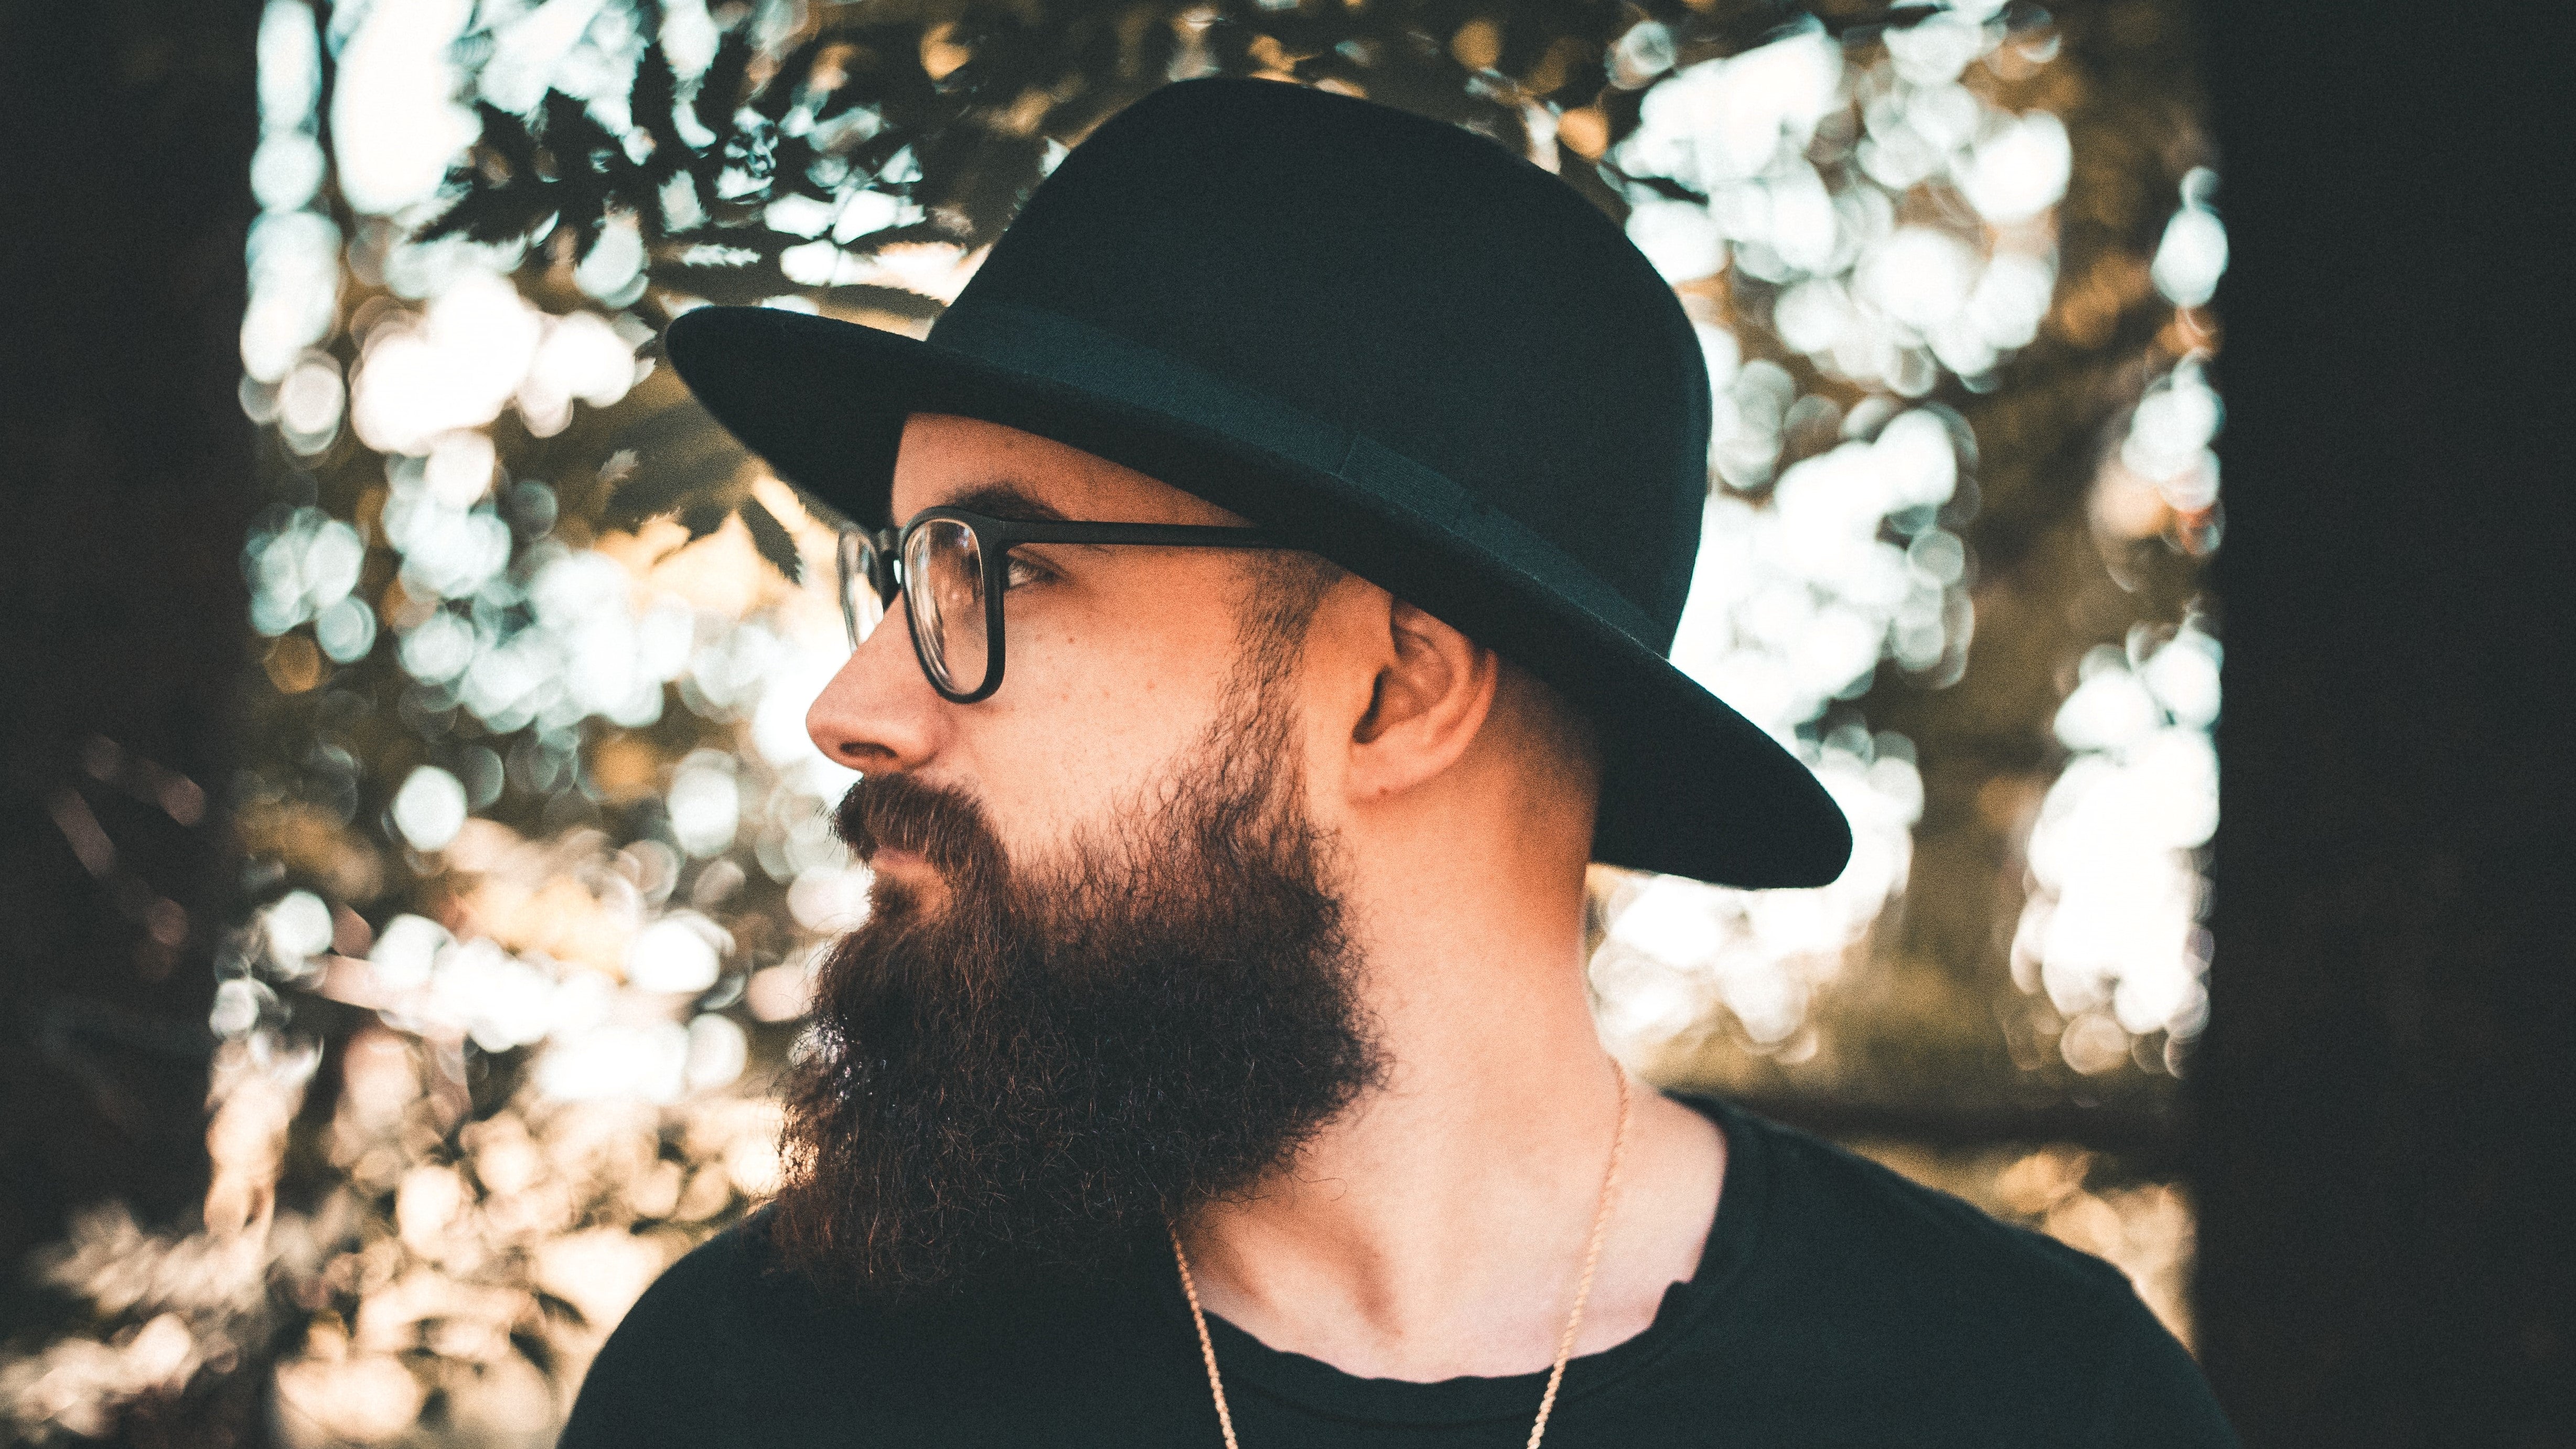 Does Wearing A Hat Cause Baldness? Myths and Facts